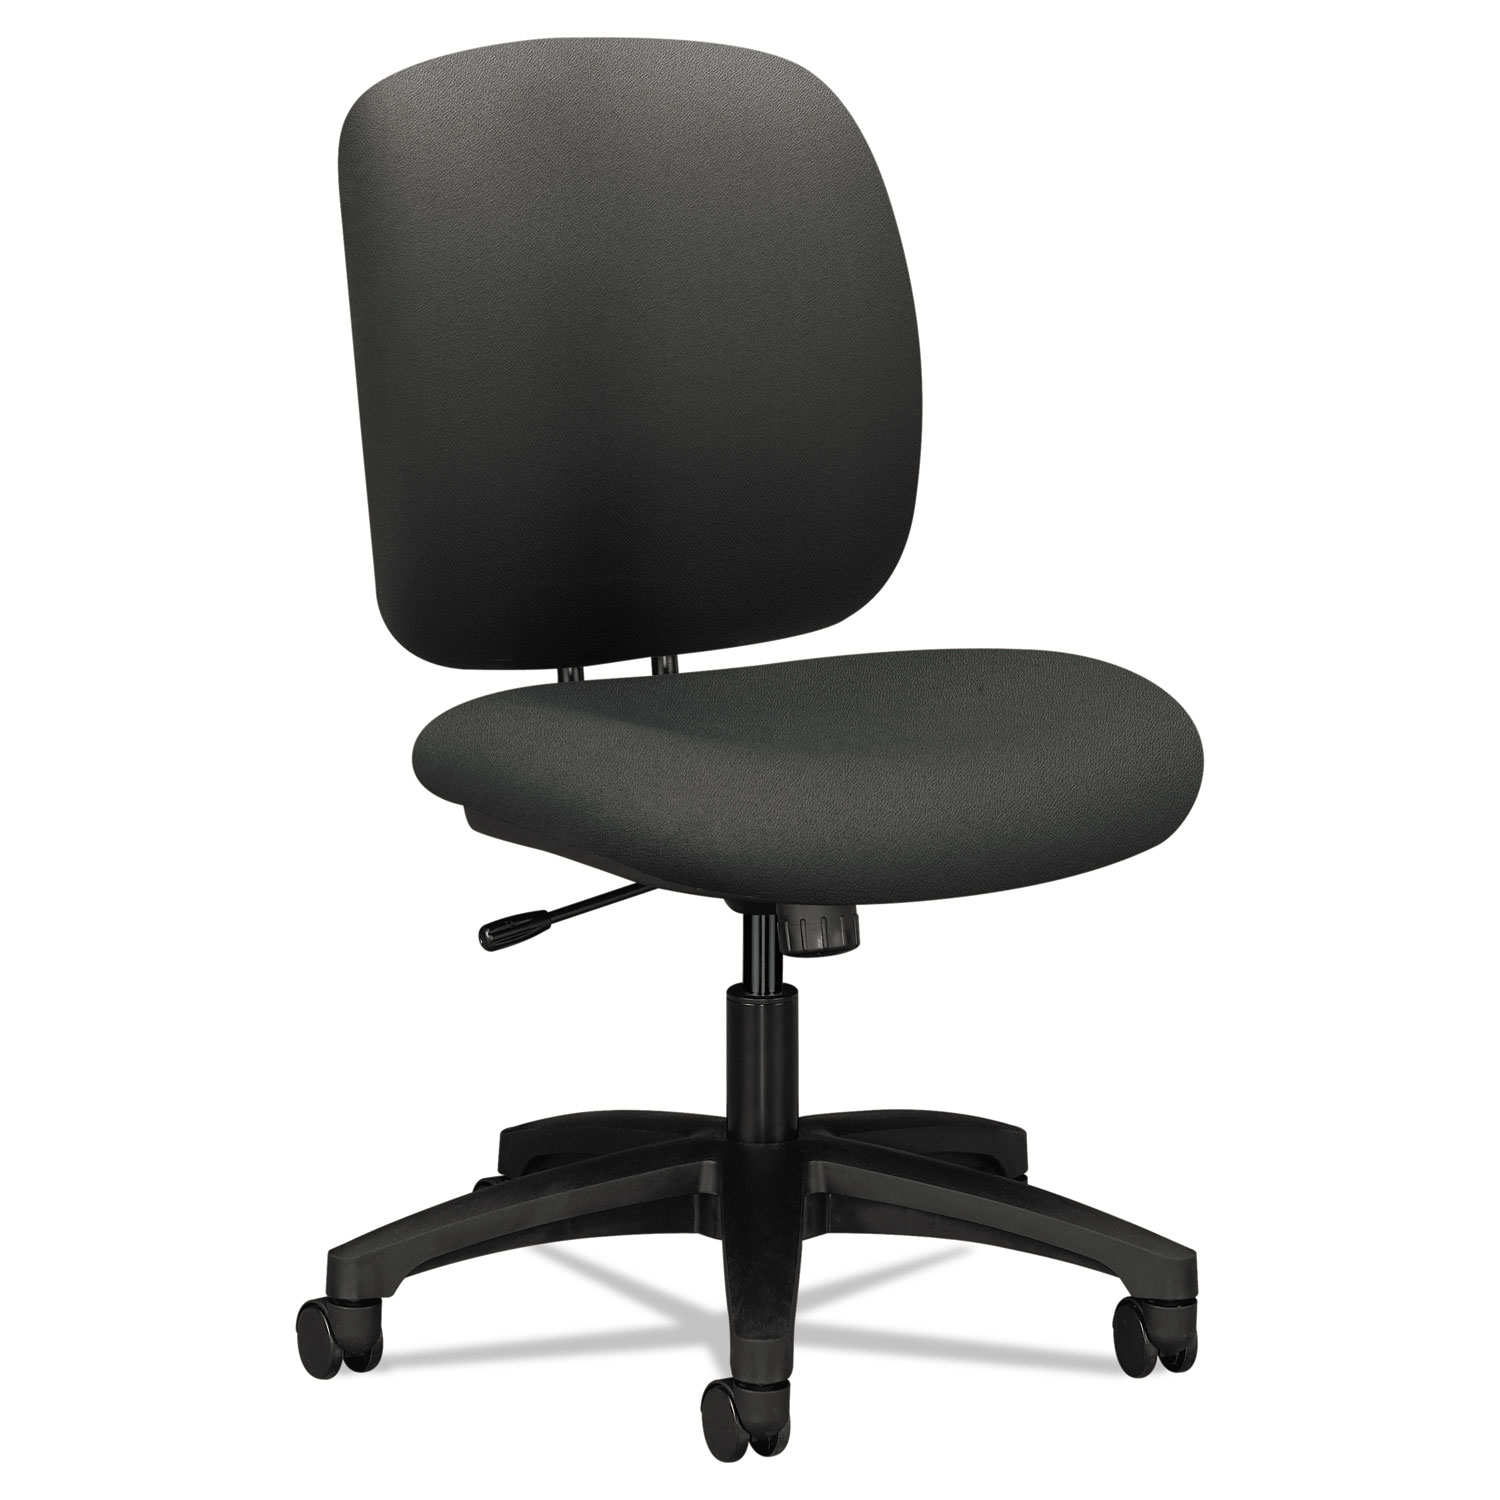  HON H5902.H.CU19.T ComforTask Task Chair, Supports up to 300 lbs, Iron Ore Seat, Iron Ore Back, Black Base (HON5902CU19T) 